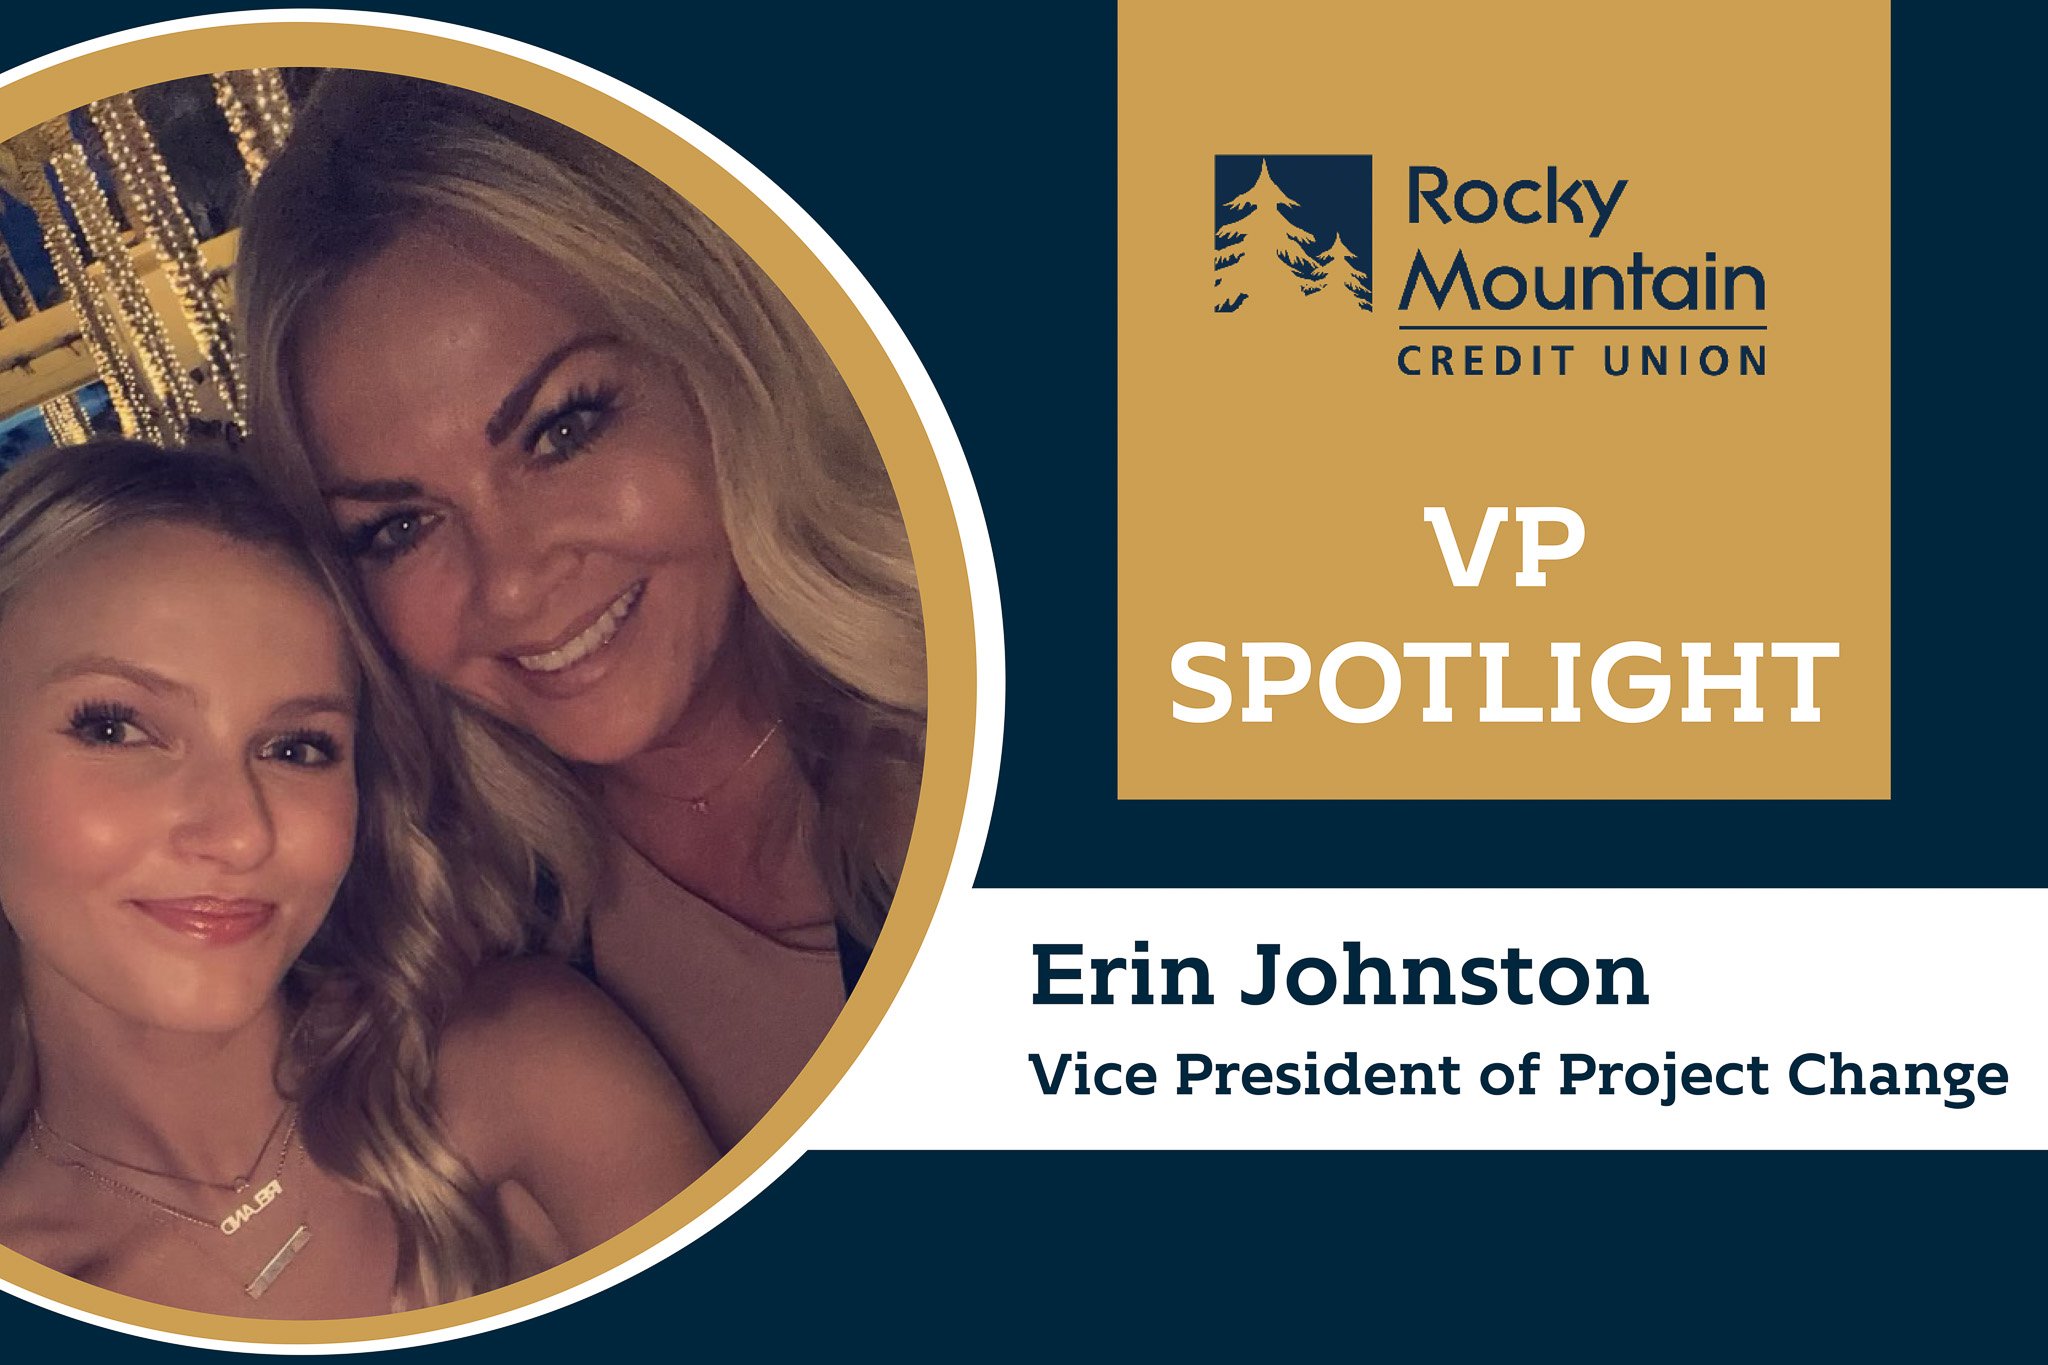 Erin Johnston, VP of Project Change at RMCU